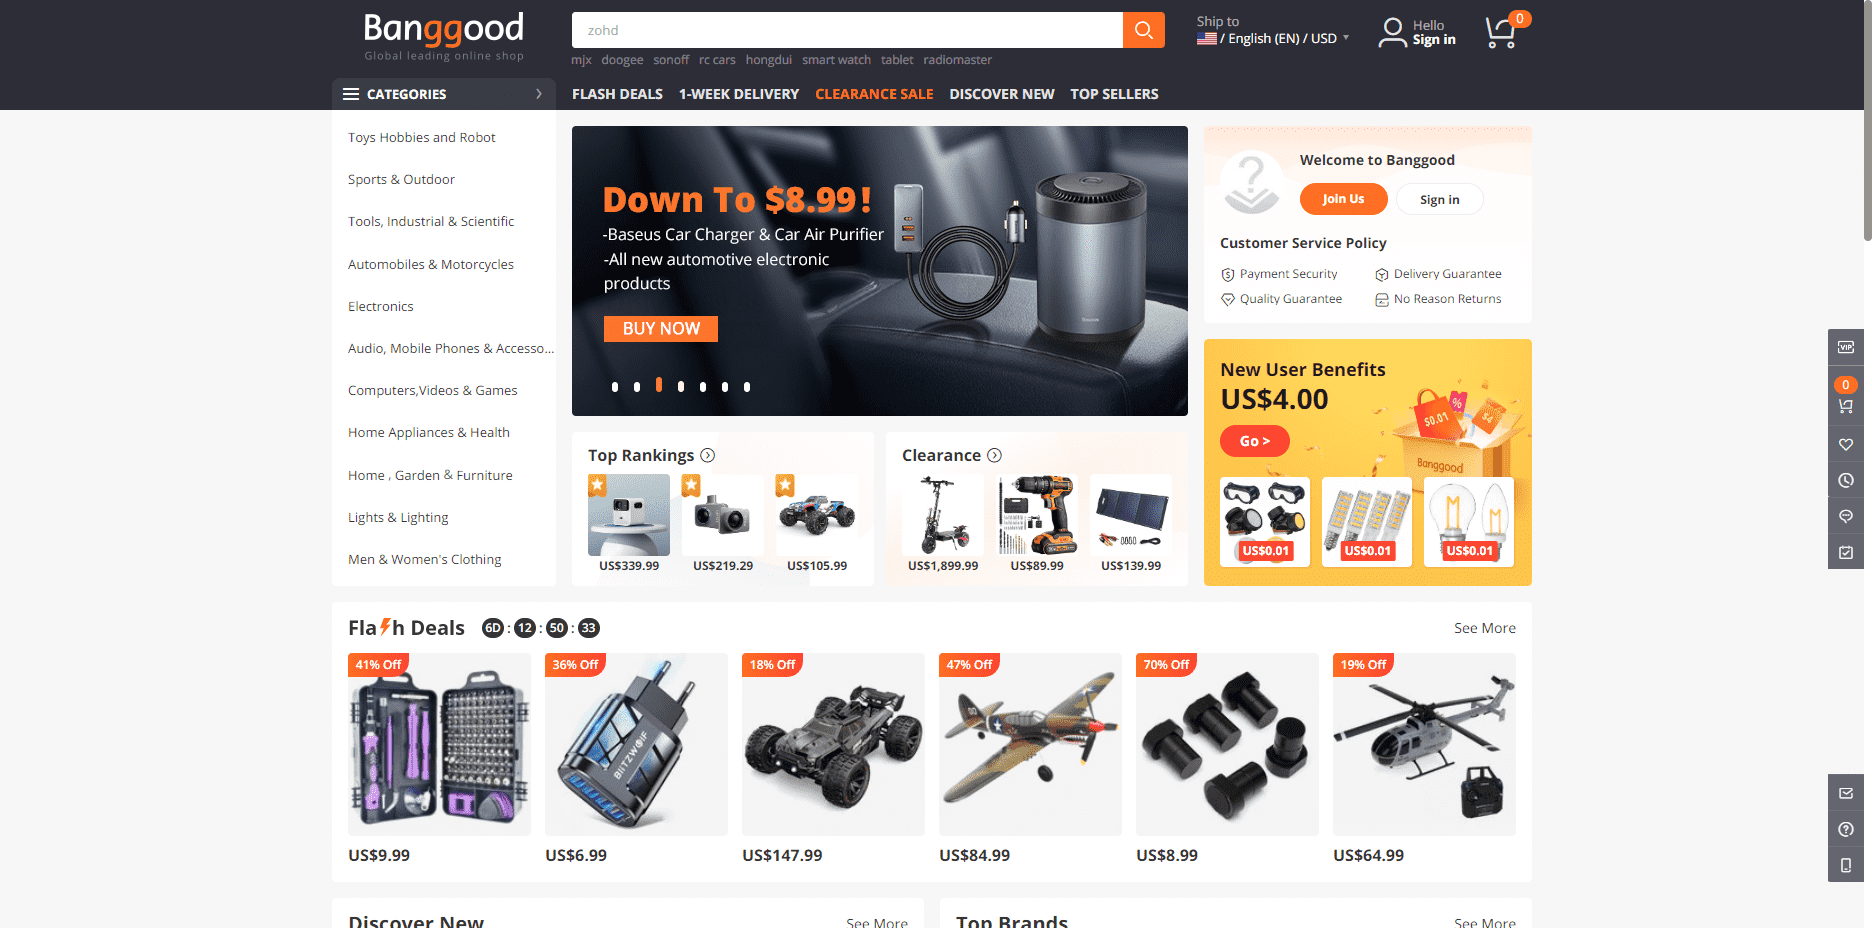 The official website of Banggood